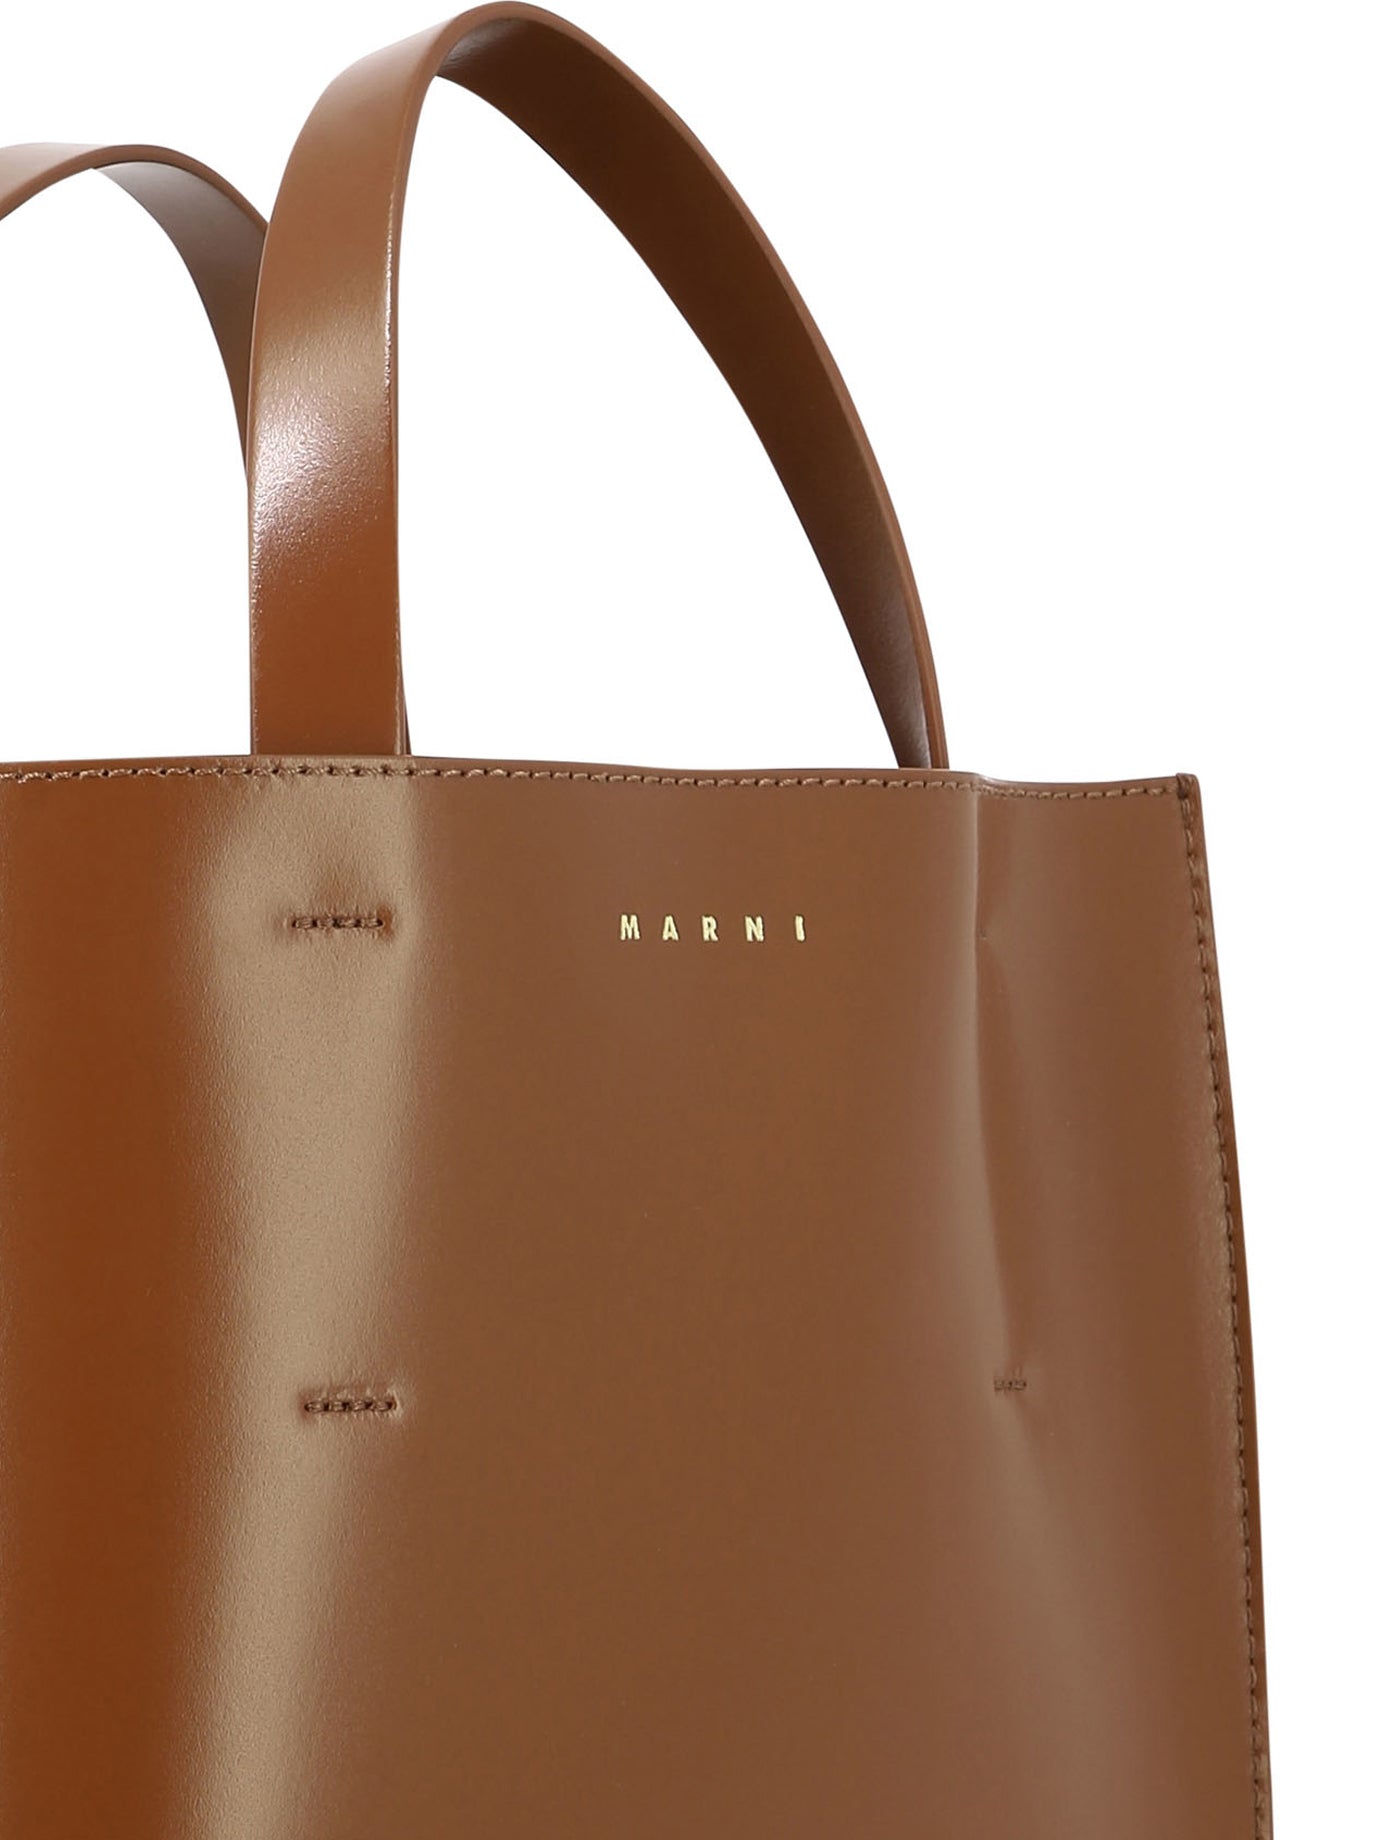 Shop Marni Luxurious Brown Leather Tote For Women